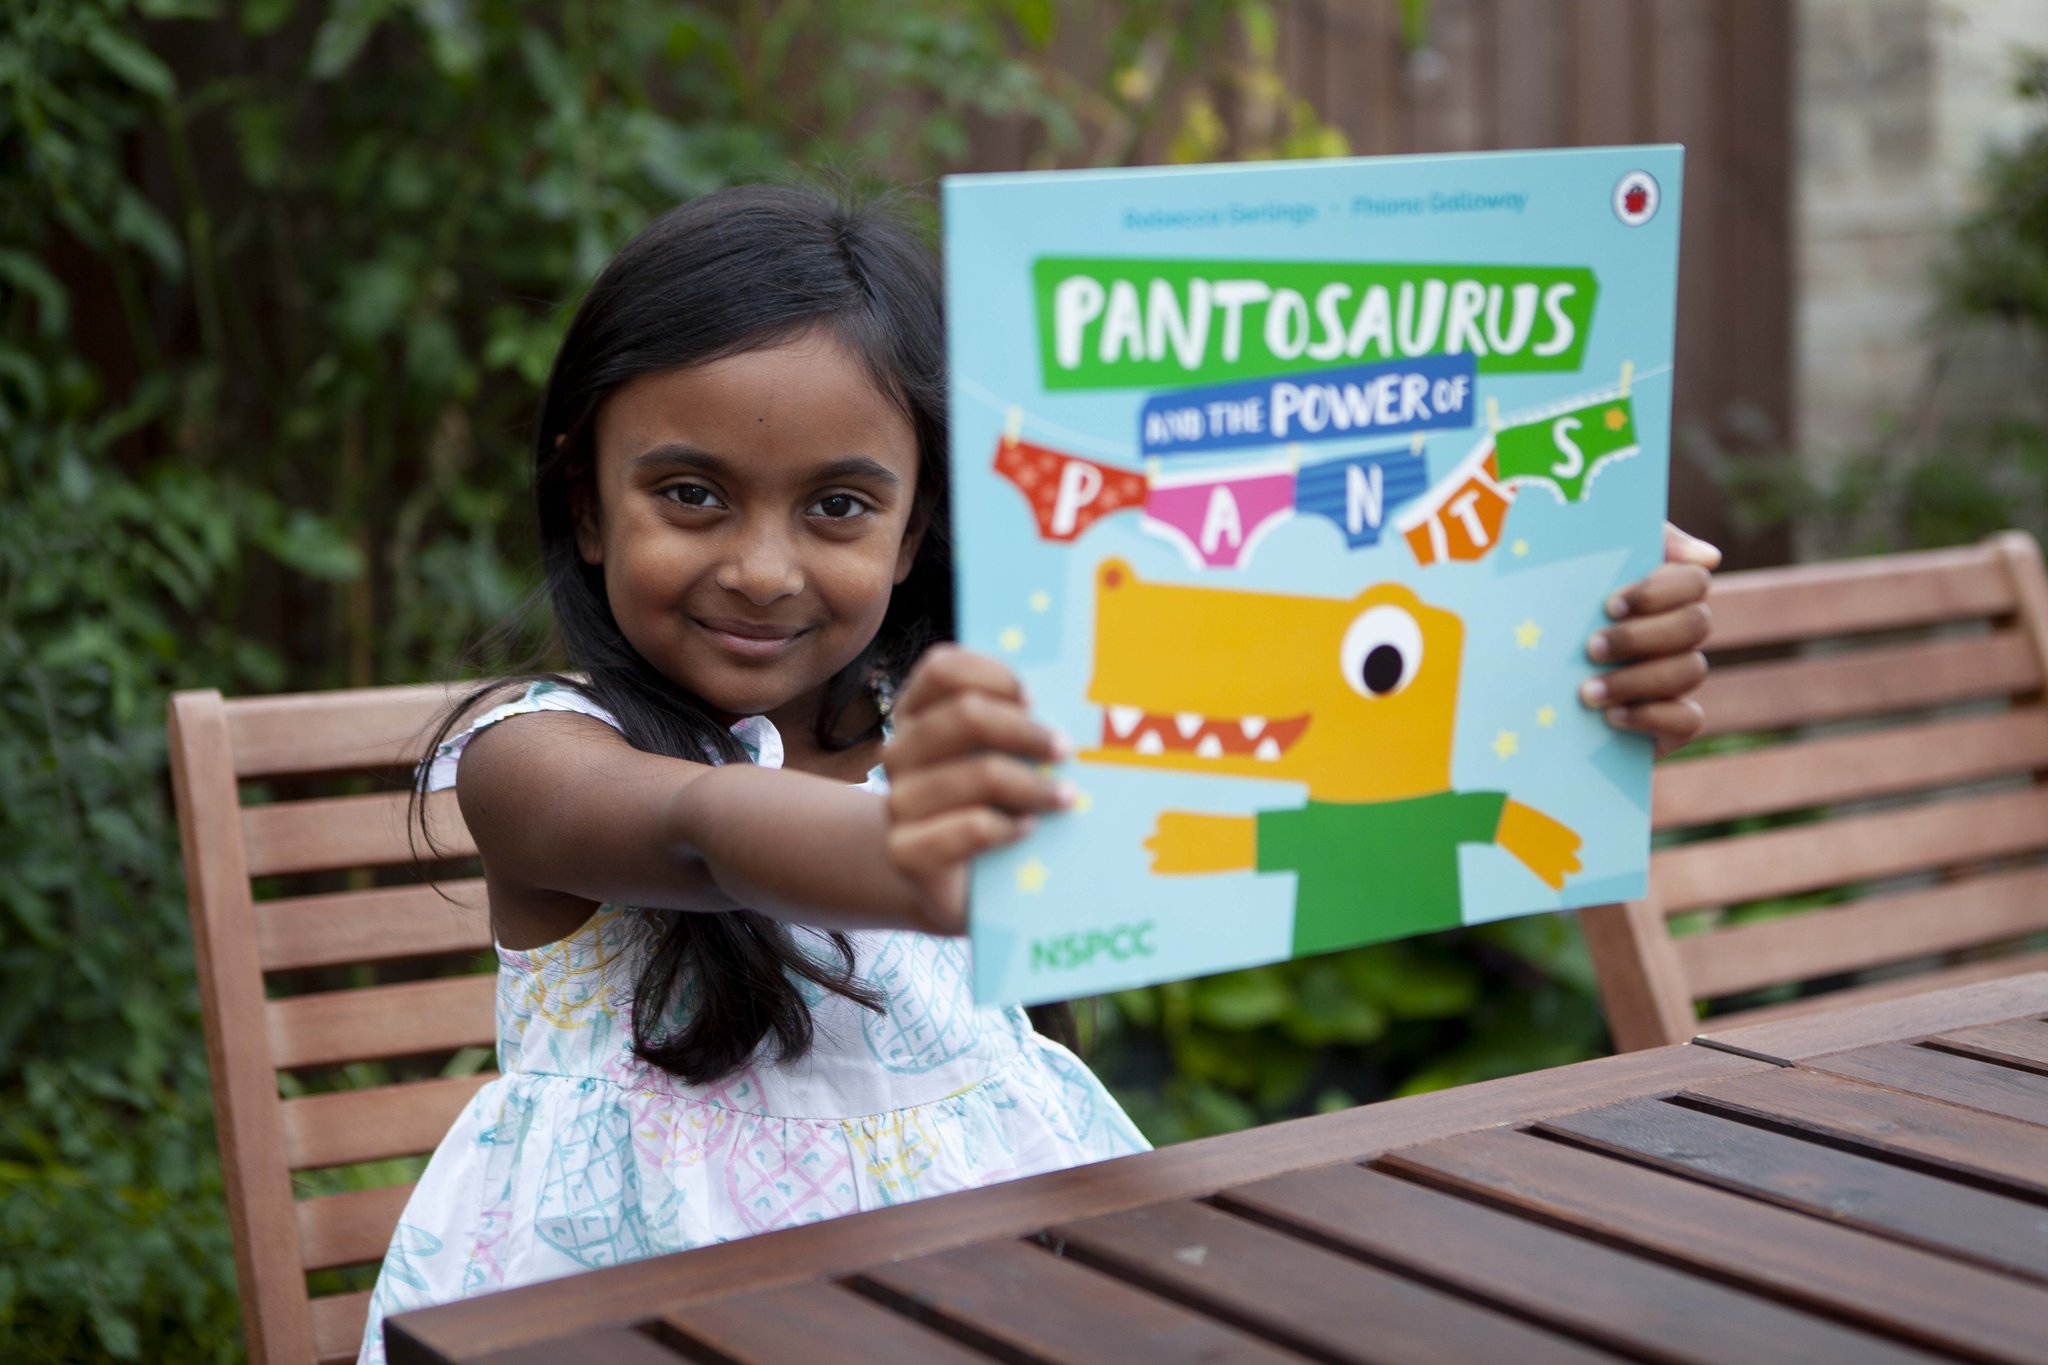 The NSPCC's Pantosaurus and the POWER of PANTS story books partners with  BookrClass | Total Licensing